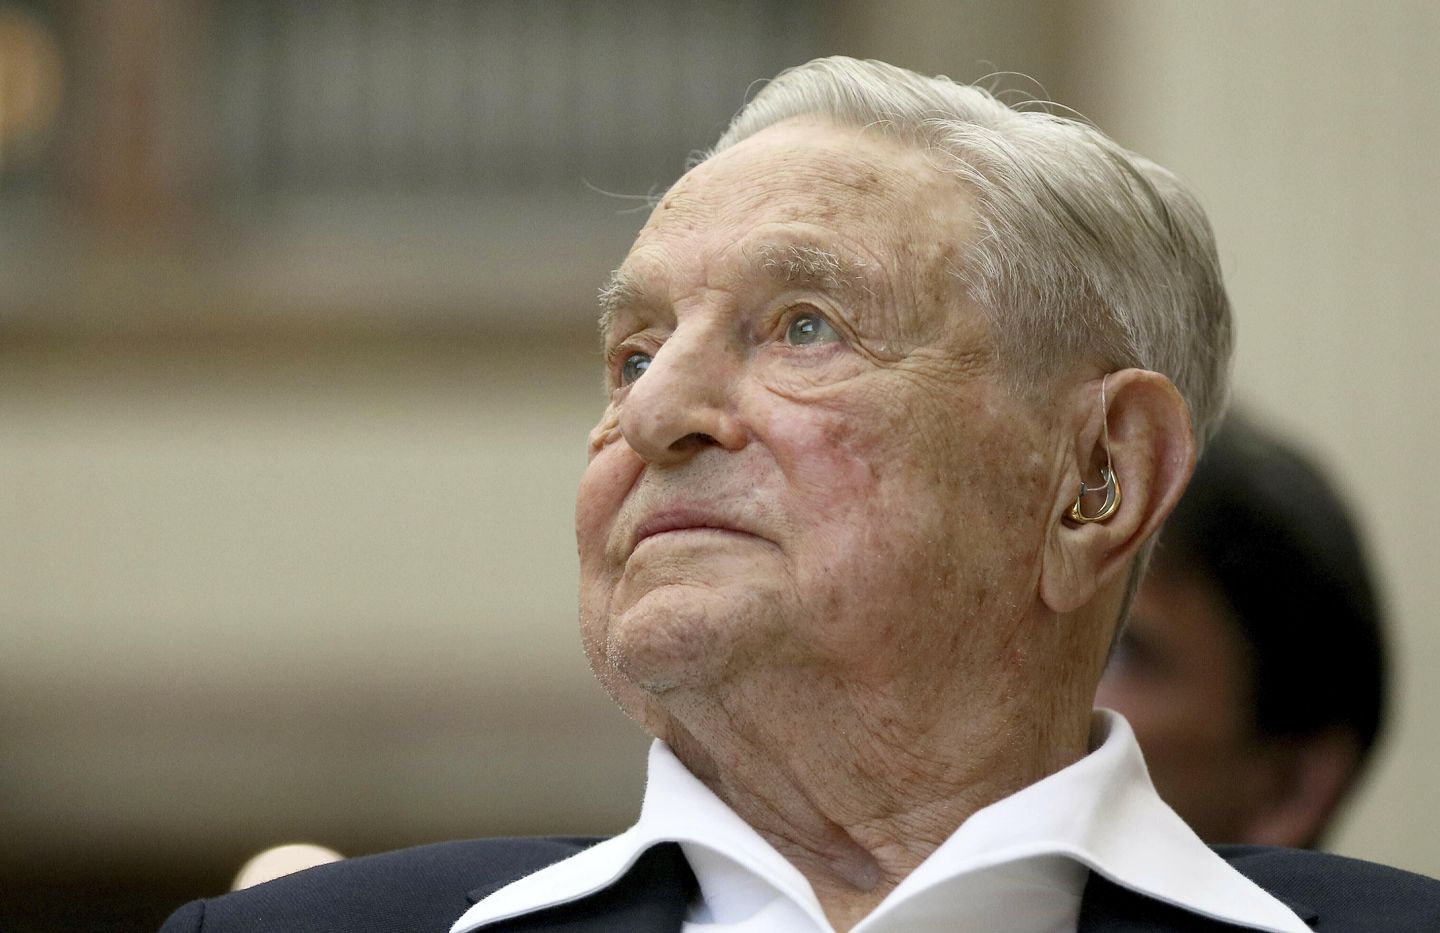 George Soros says he doesn't even know Alvin Bragg